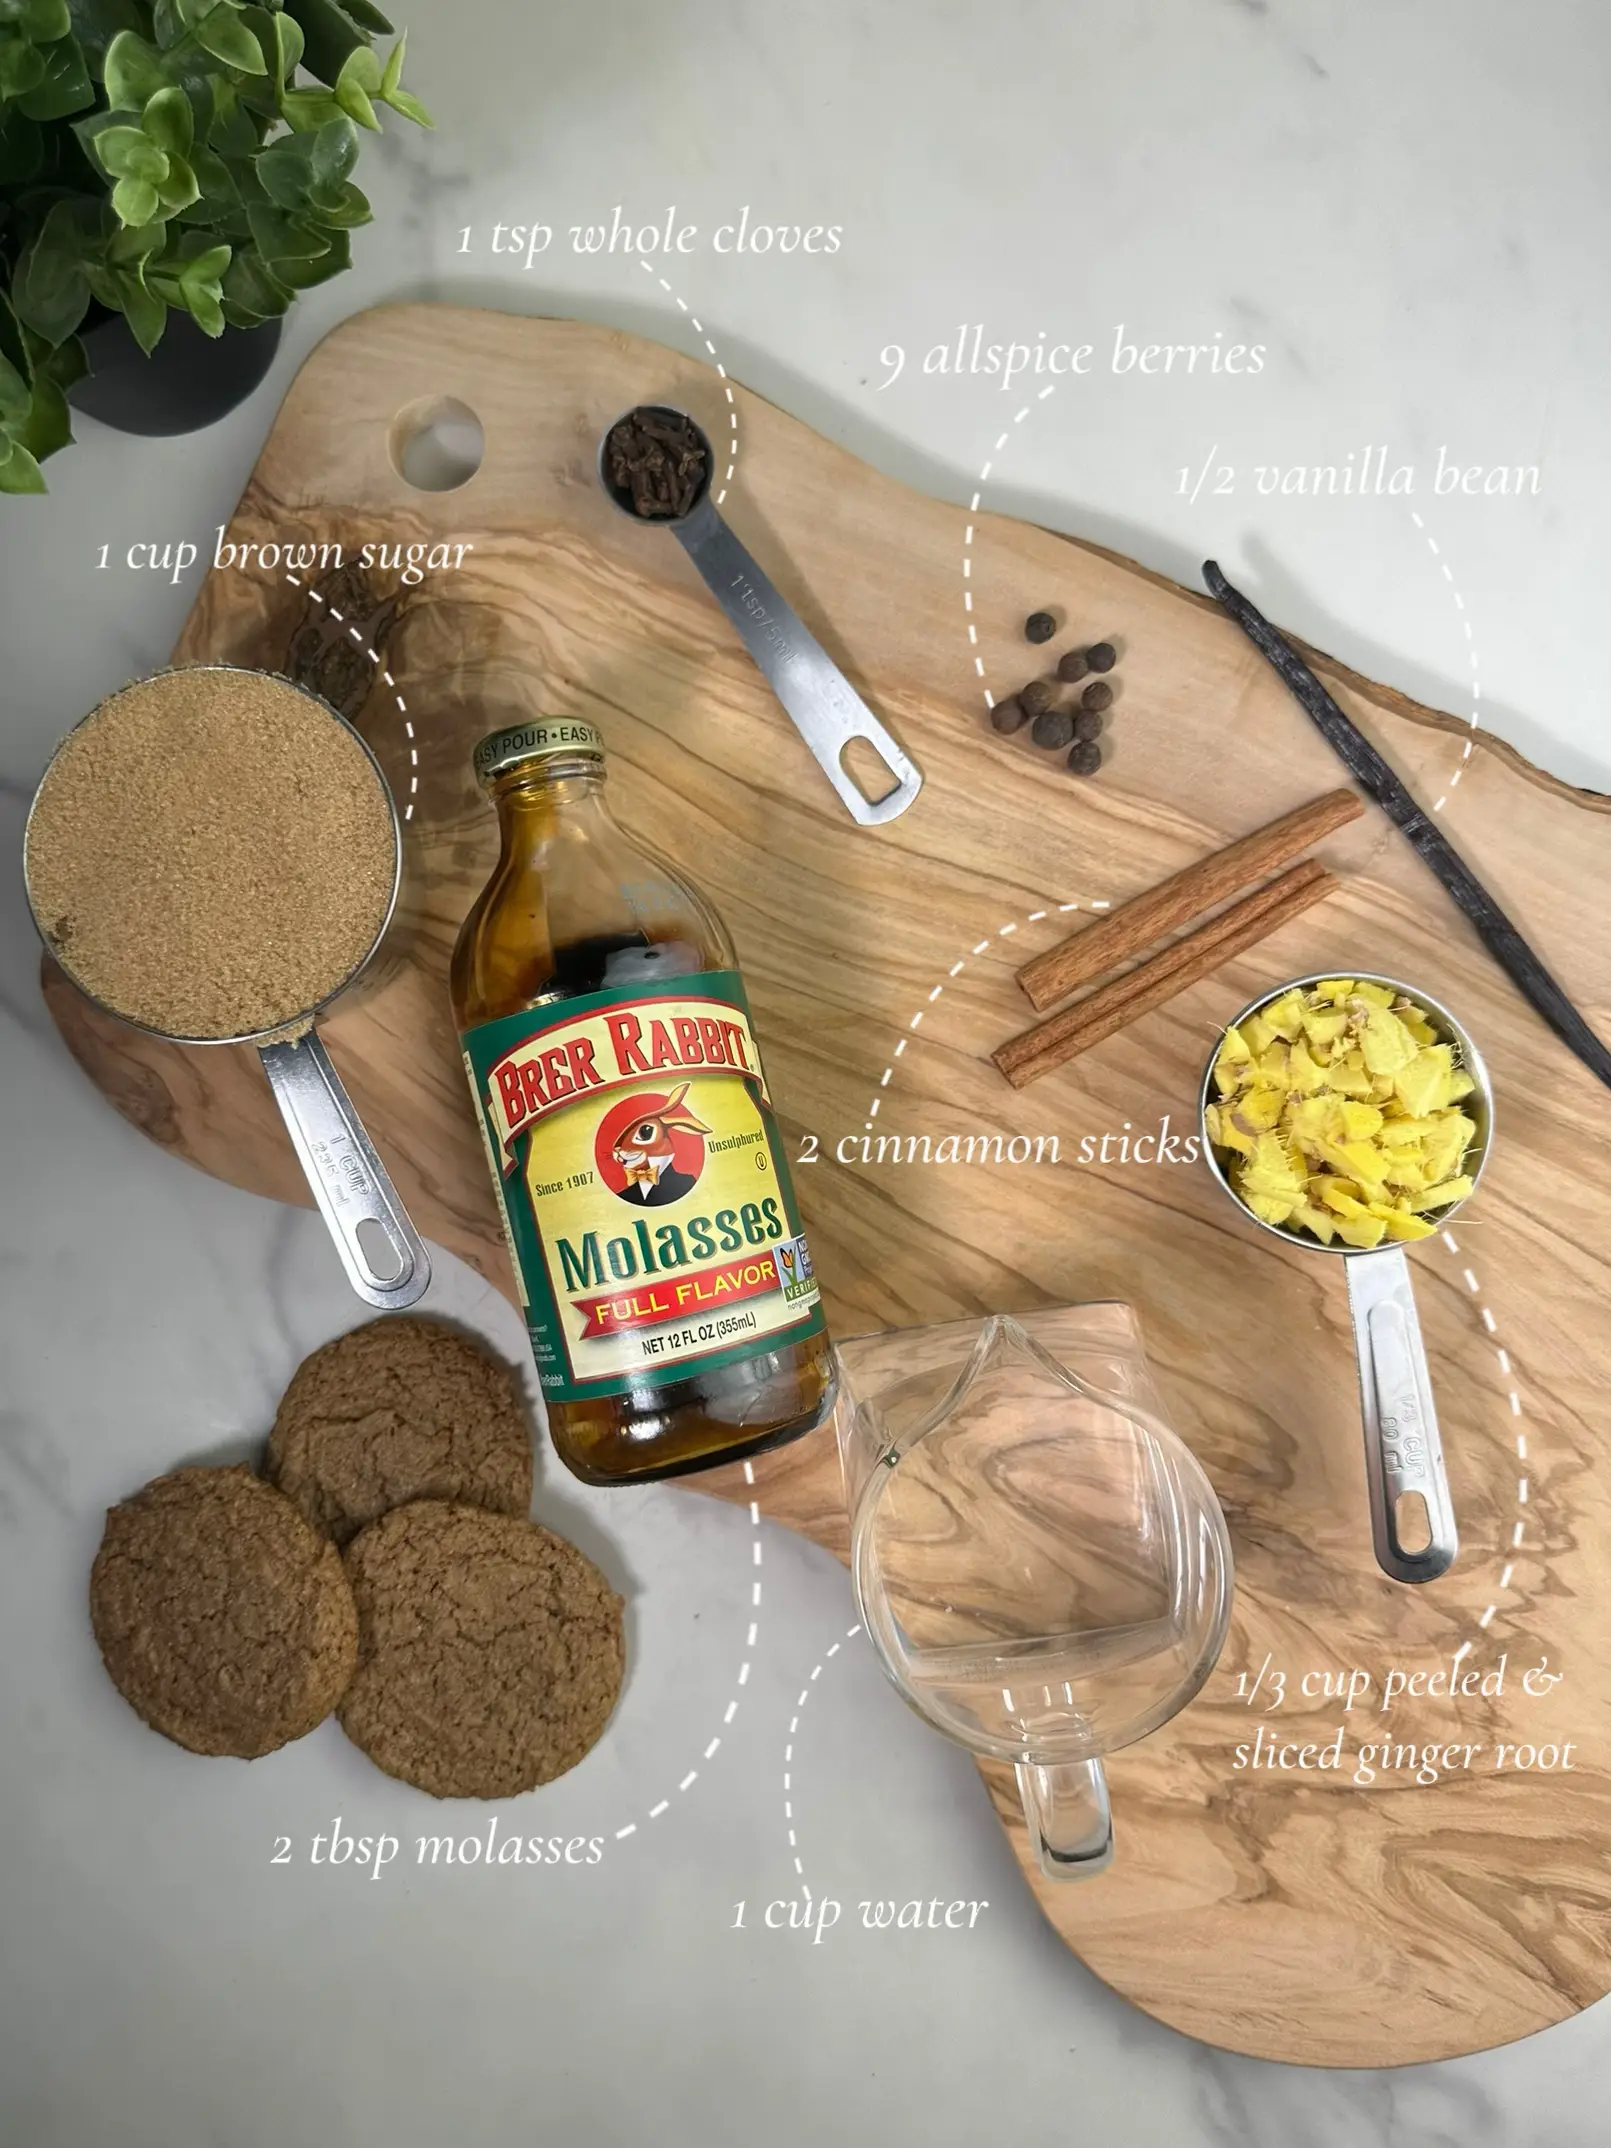  A wooden cutting board with a variety of ingredients for making a cup of coffee.